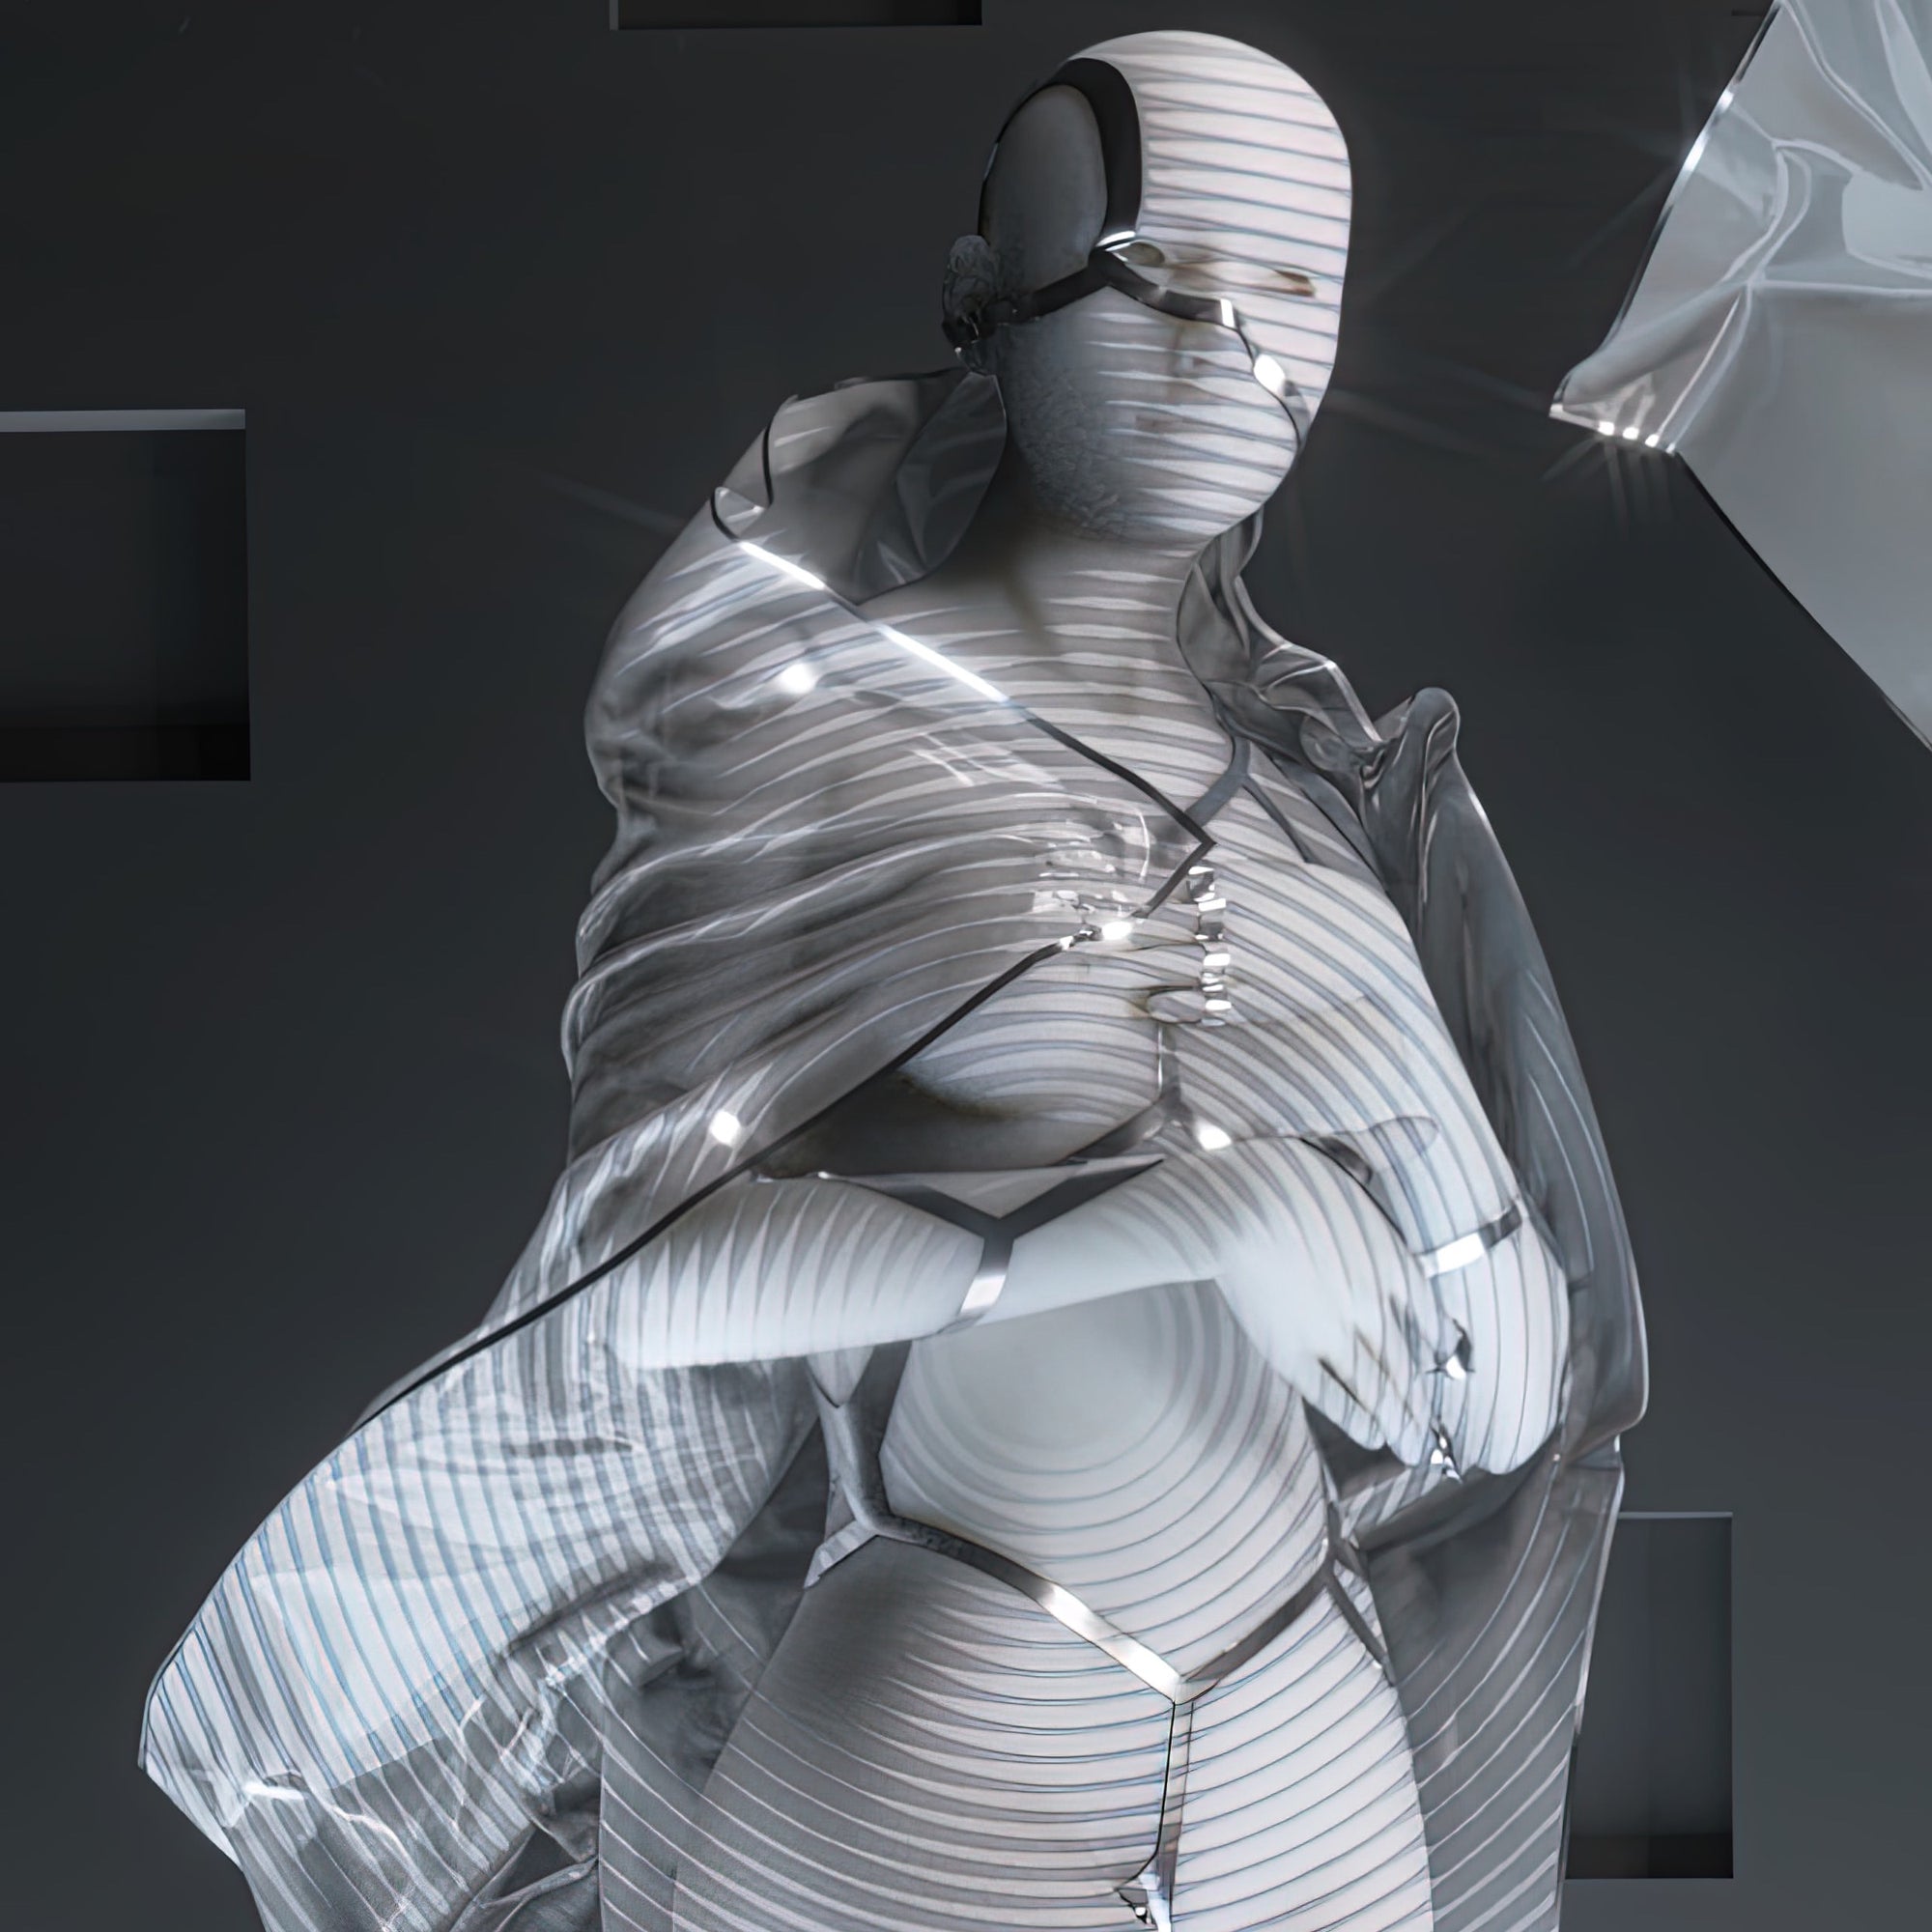 Digital Fashion in The Metaverse: A Sustainable Fashion Alternative?